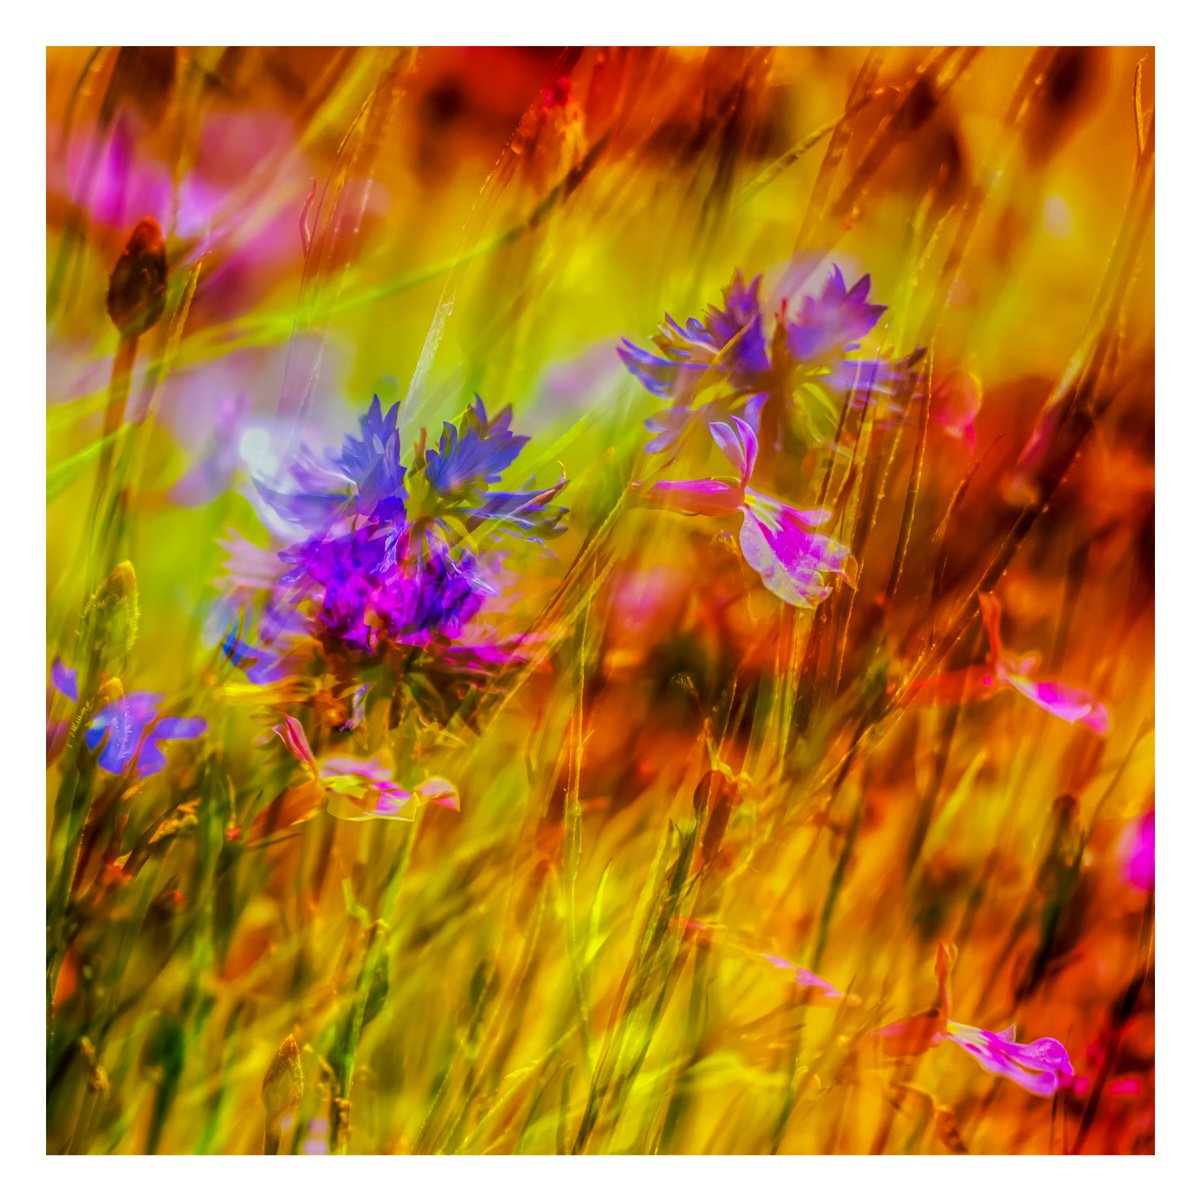 Summer Meadows #9. Limited Edition 1/25 12x12 inch Abstract Photographic Print. by Graham Briggs